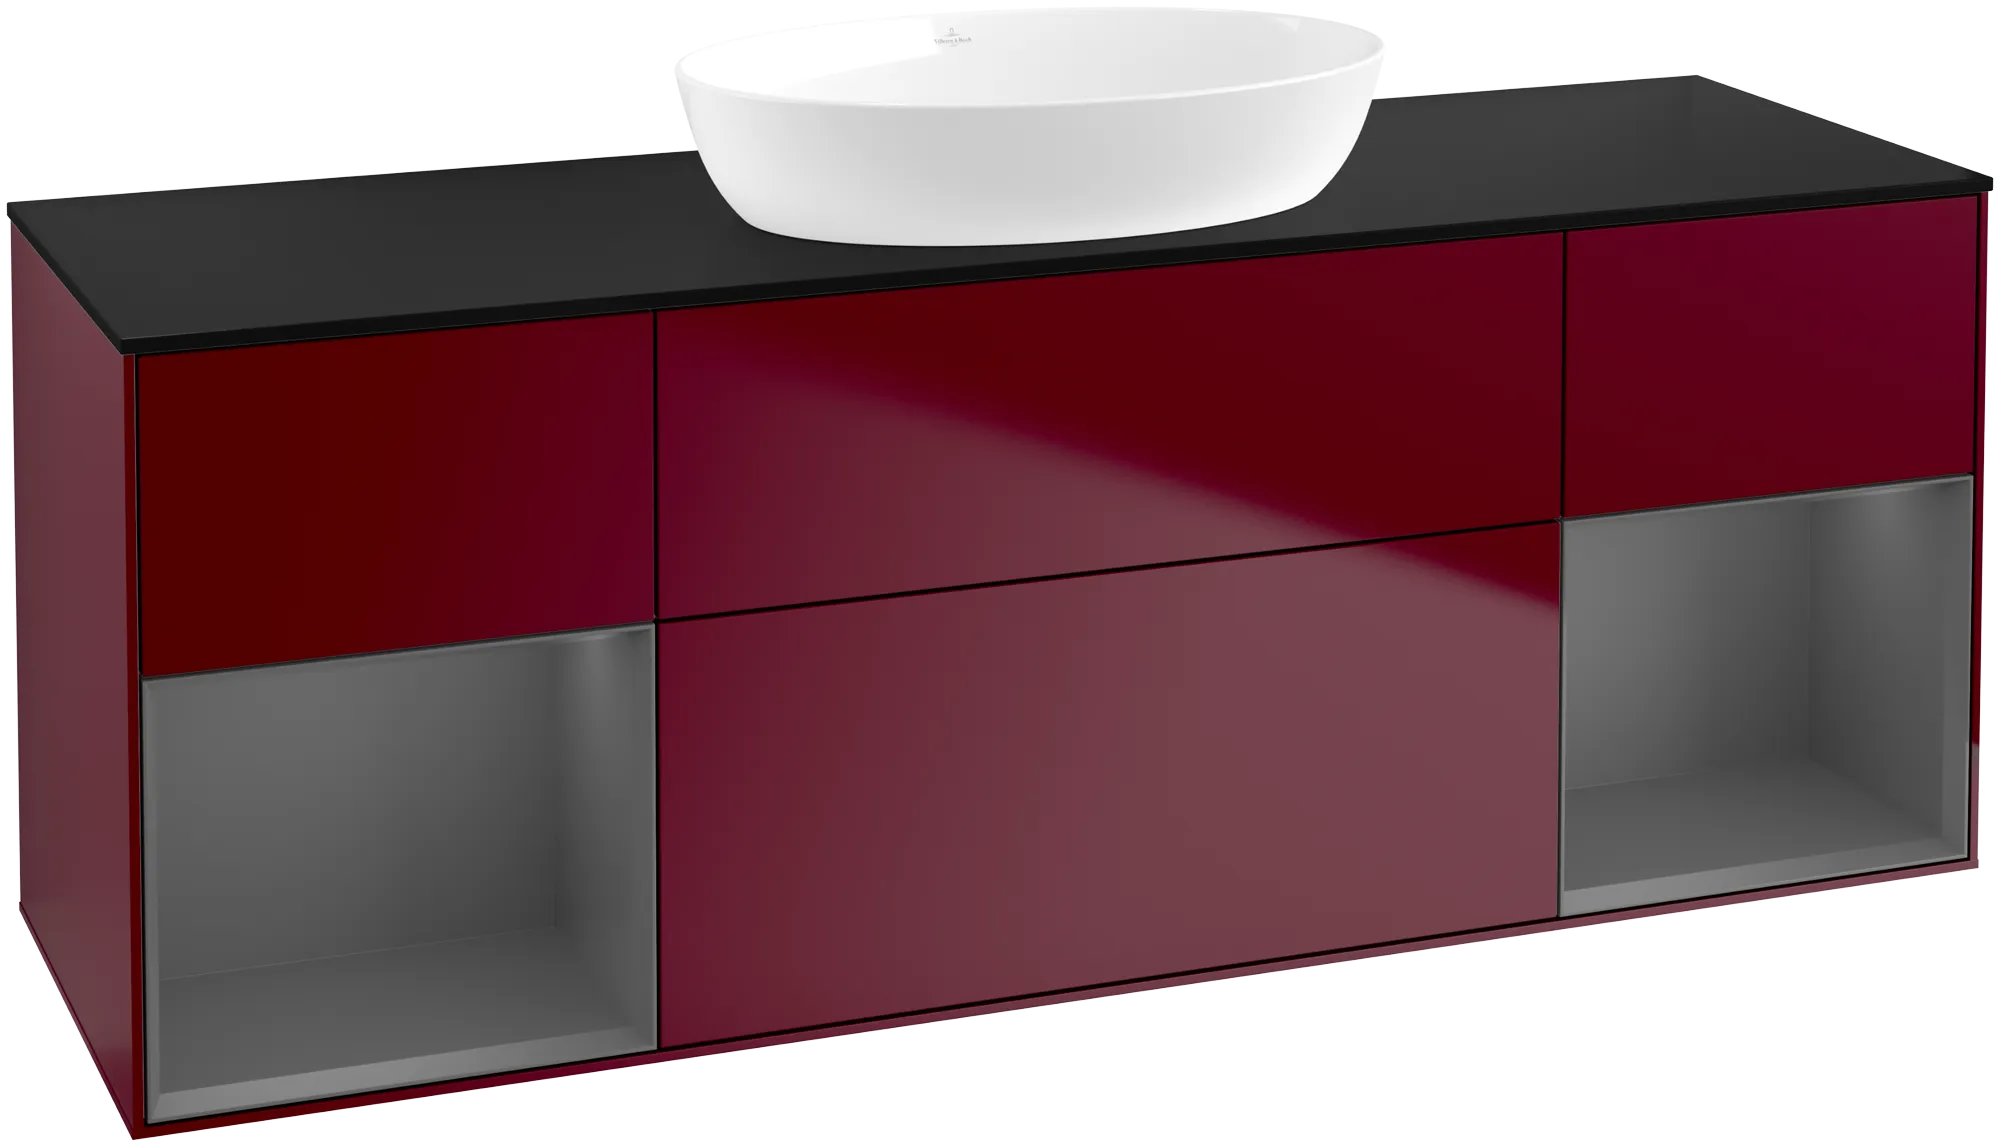 Picture of VILLEROY BOCH Finion Vanity unit, with lighting, 4 pull-out compartments, 1600 x 603 x 501 mm, Peony Matt Lacquer / Anthracite Matt Lacquer / Glass Black Matt #GD02GKHB